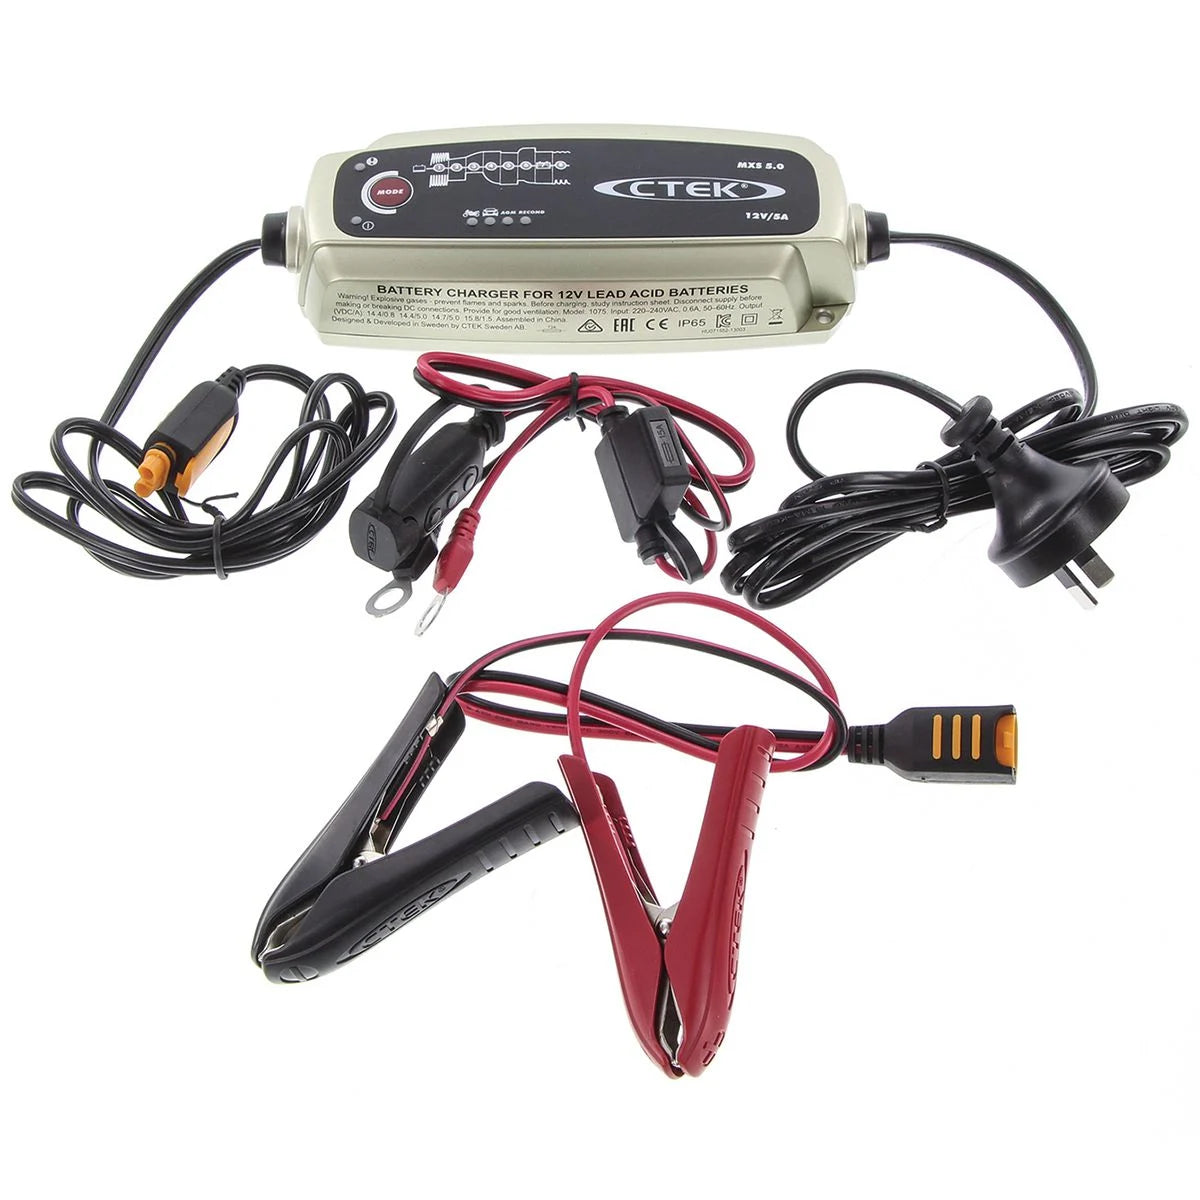 CTEK MXS 5.0 12V-5AMP NG CHARGER with Temperature Compensation – Action Lab